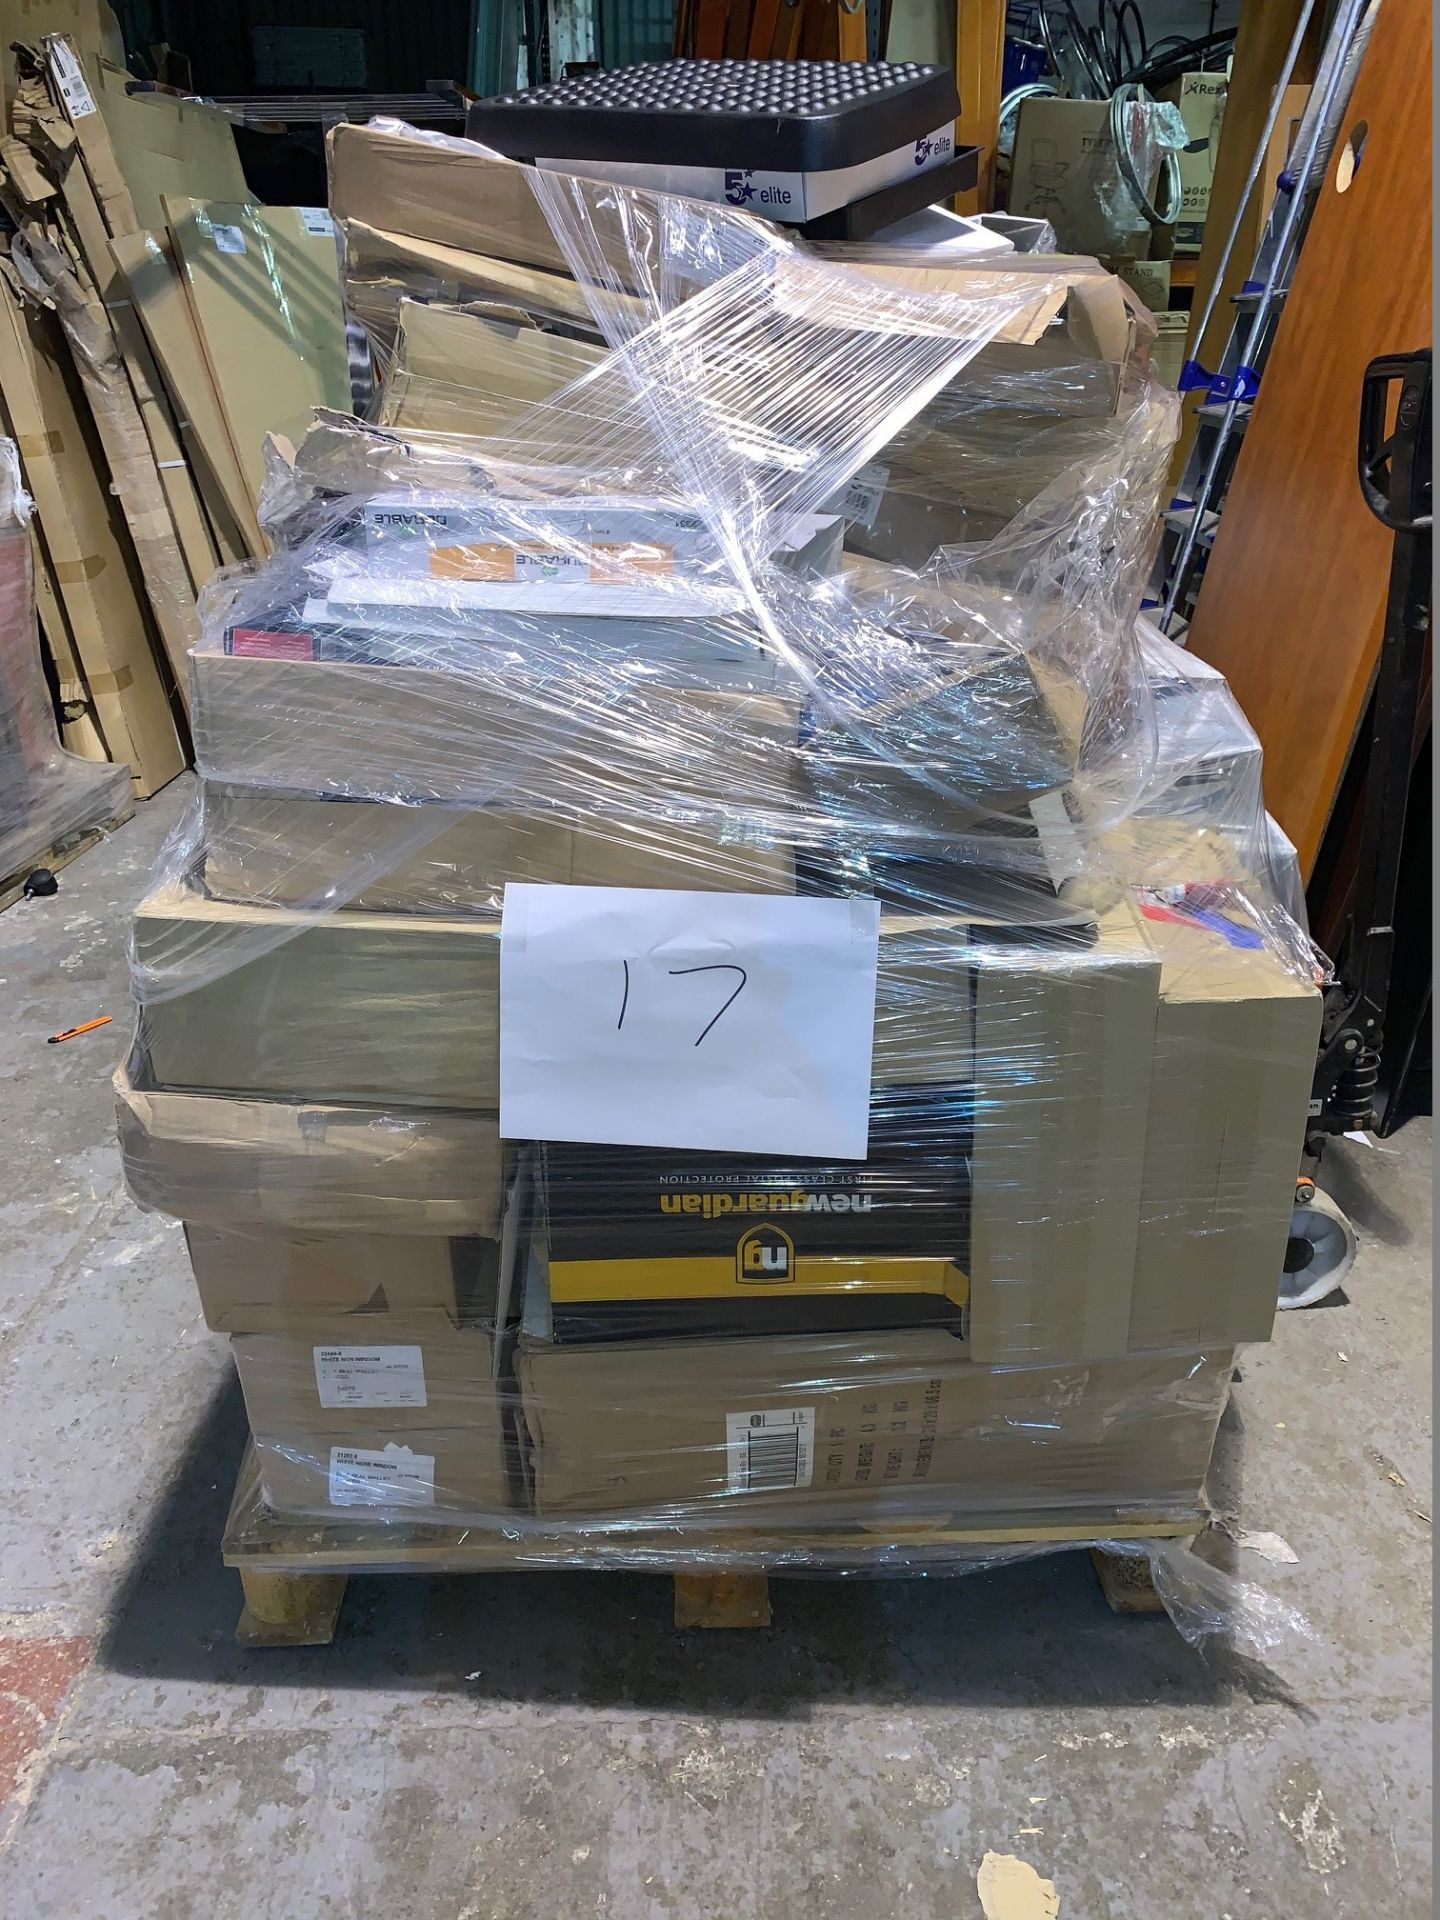 1 x Pallet of Mixed Stock/Stationery Including Envelopes, Stainless Steel Bin, Ring Binders,